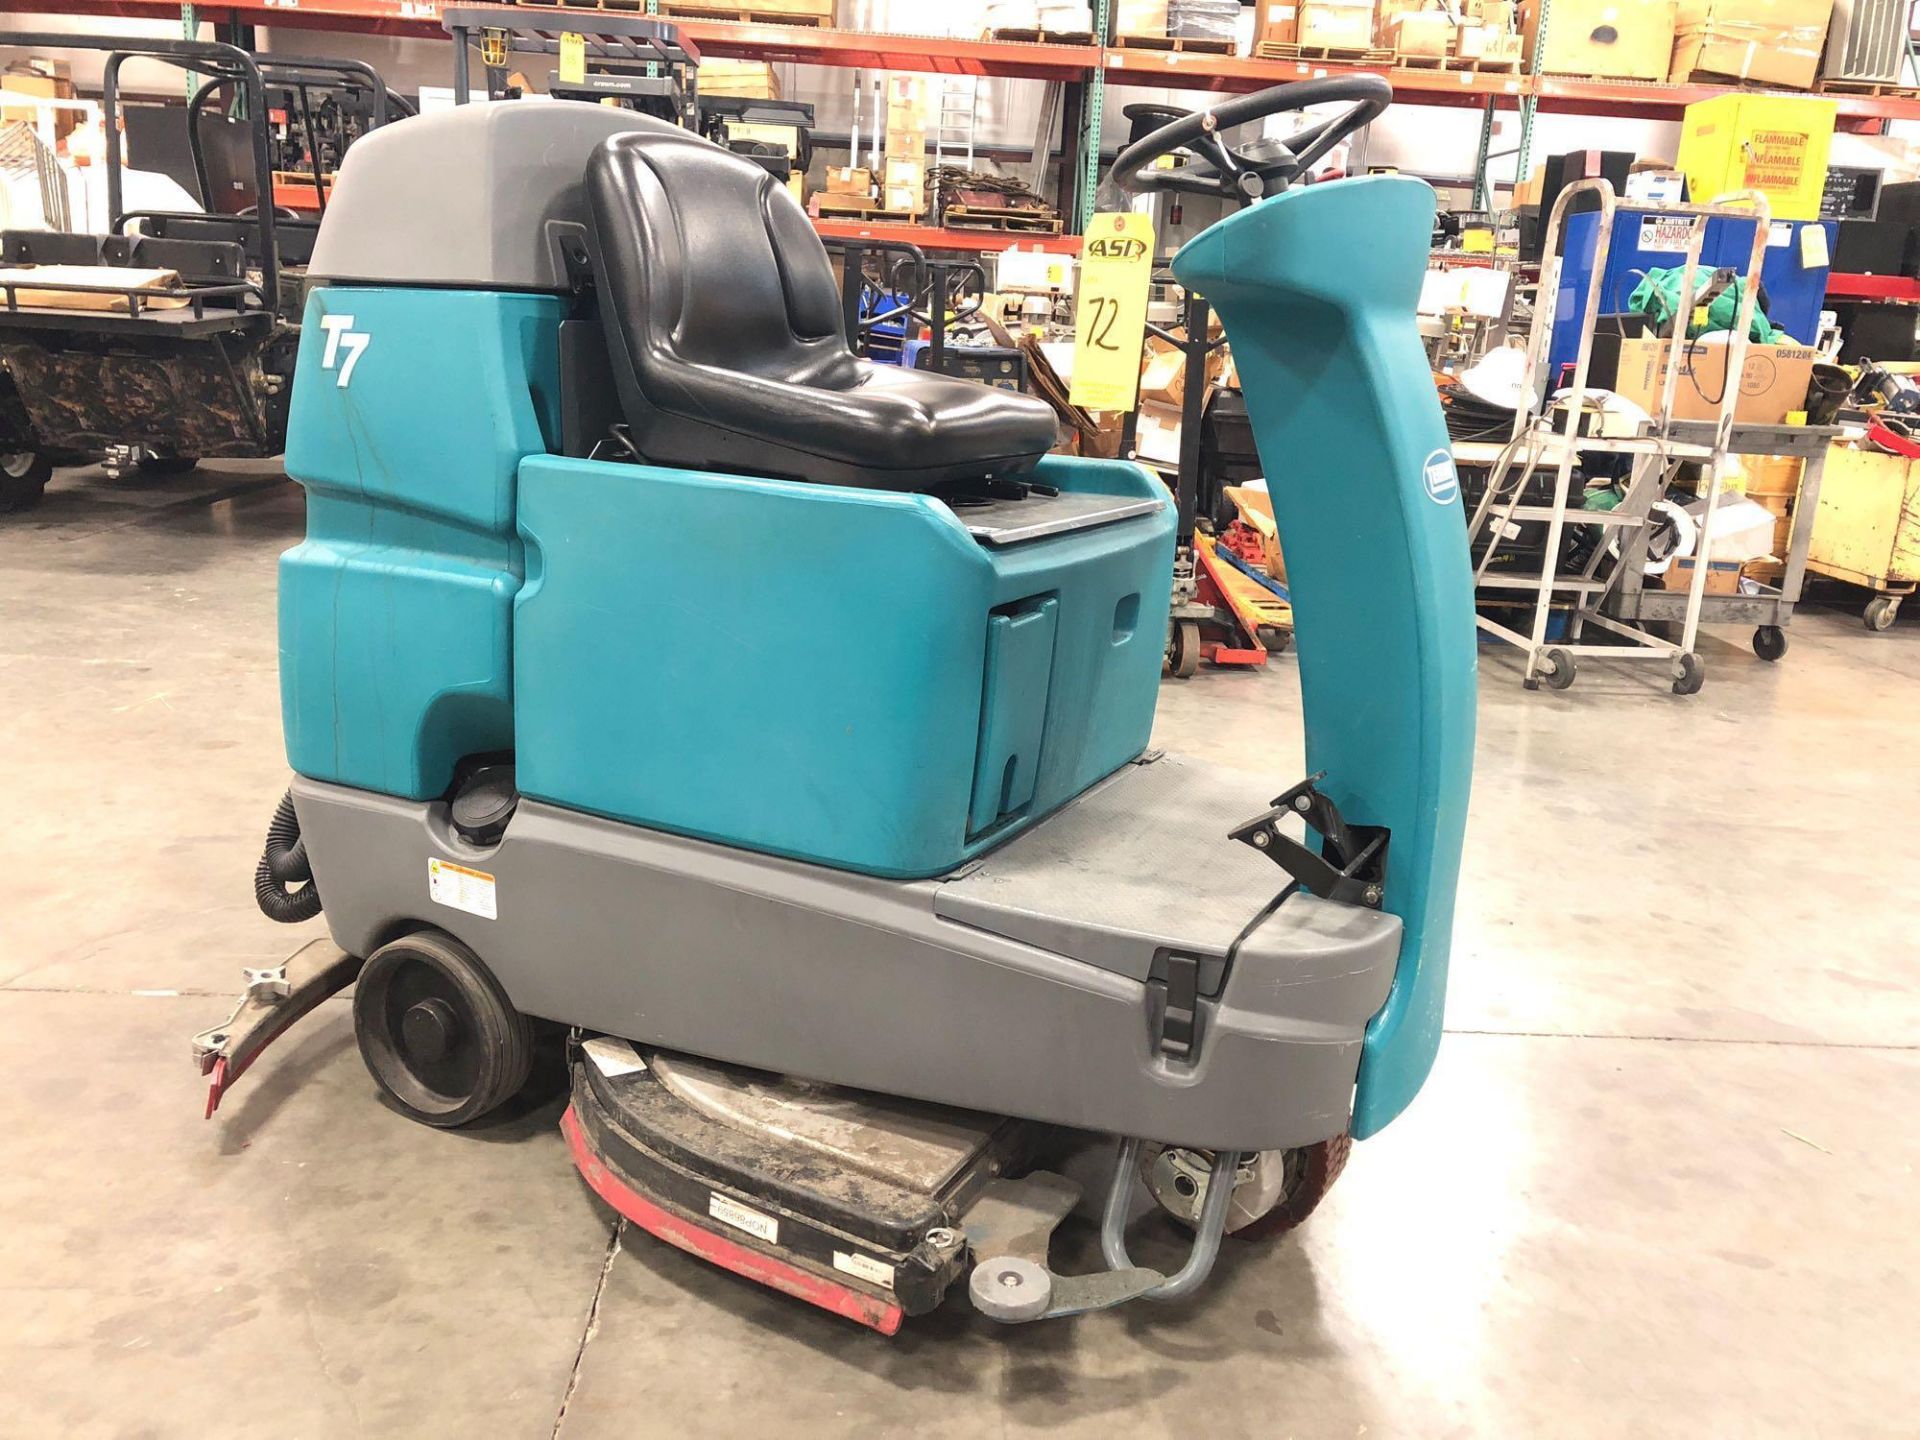 2015 TENNANT T7 ELECTRIC FLOOR SCRUBBER, BUILT IN BATTERY CHARGER, 872 HOURS SHOWING, RUNS